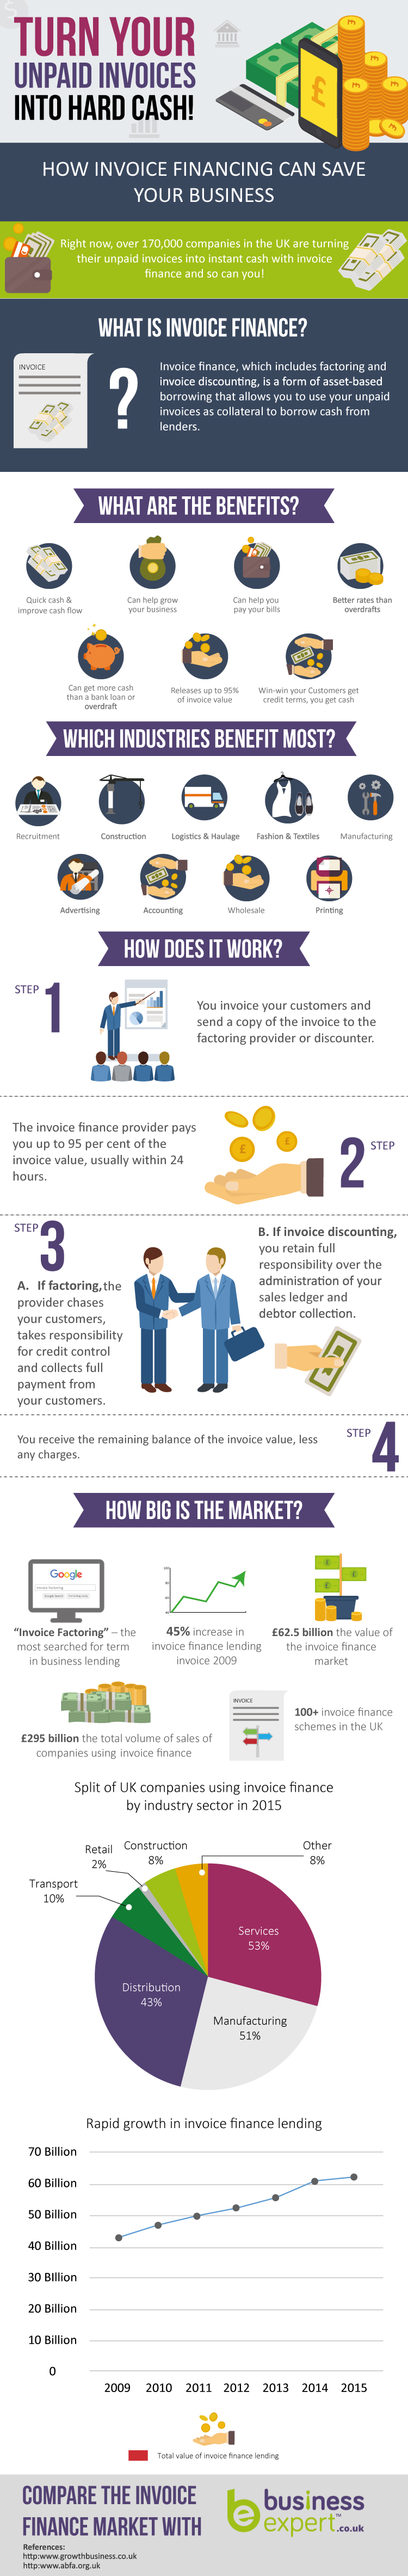 What is Invoice Financing?